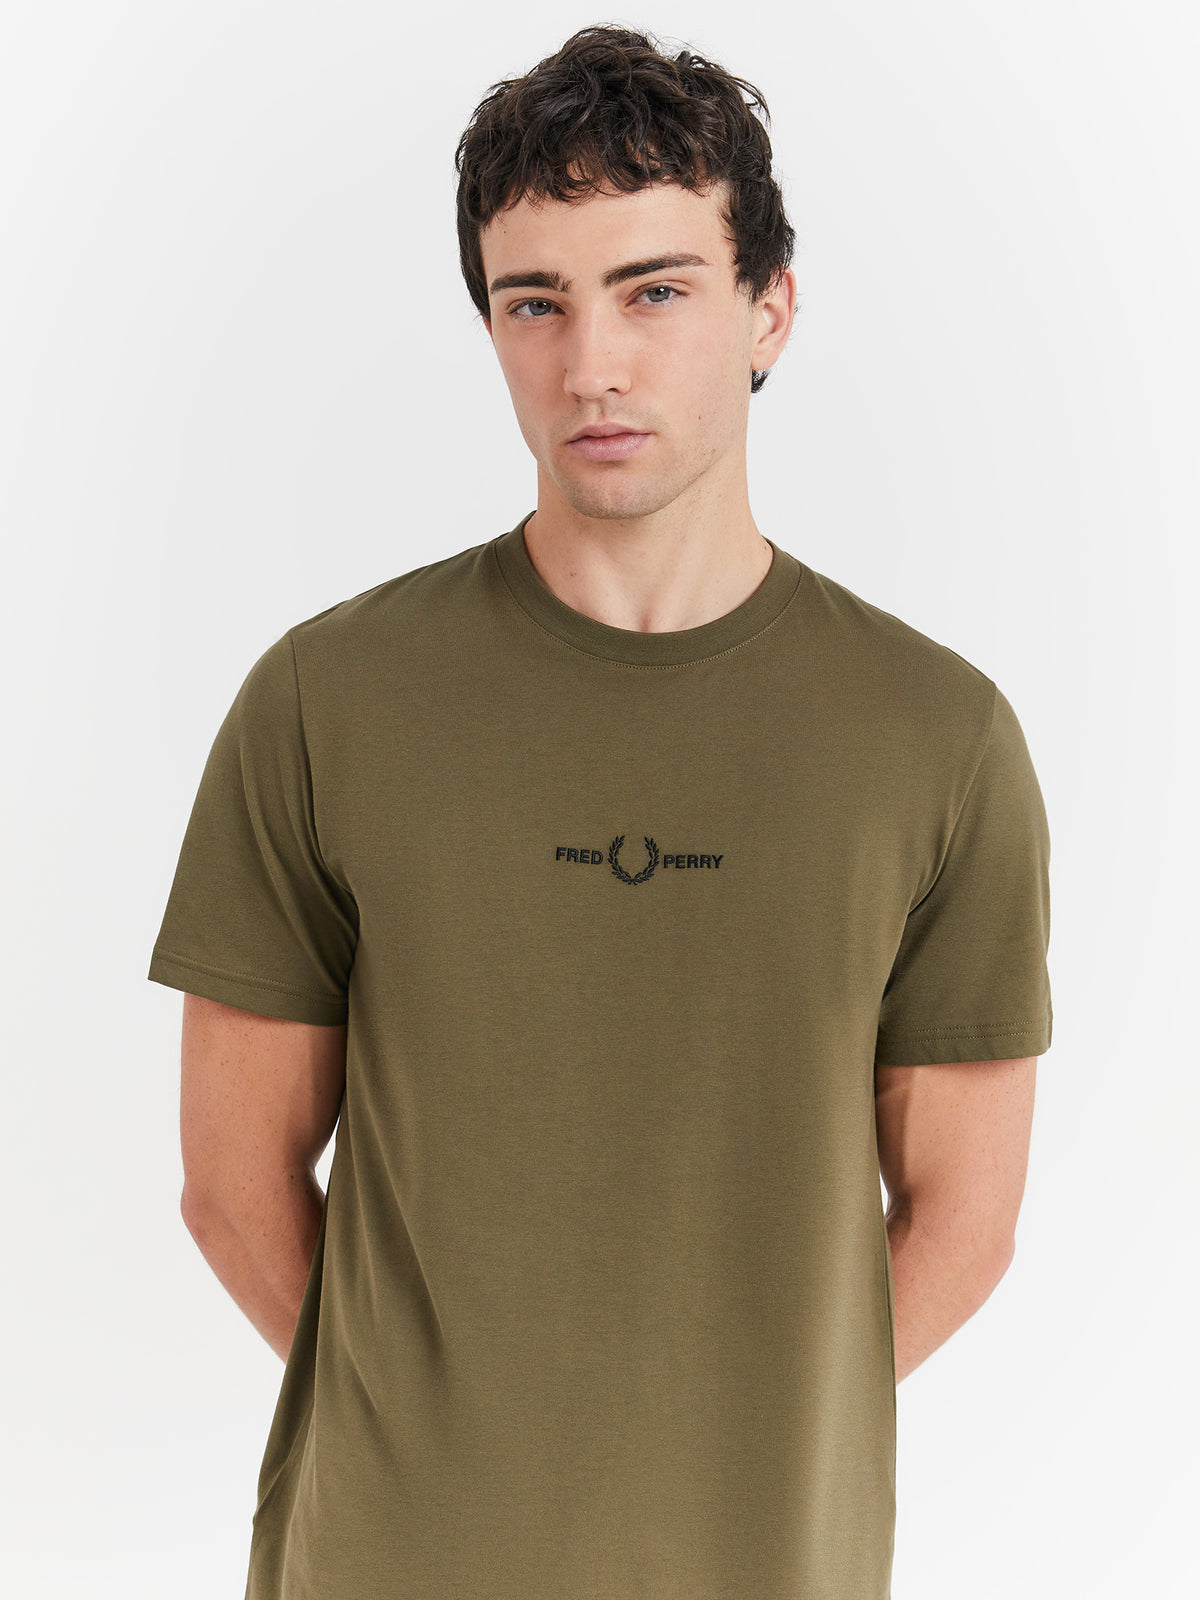 Embroidered T-Shirt in Uniform Green